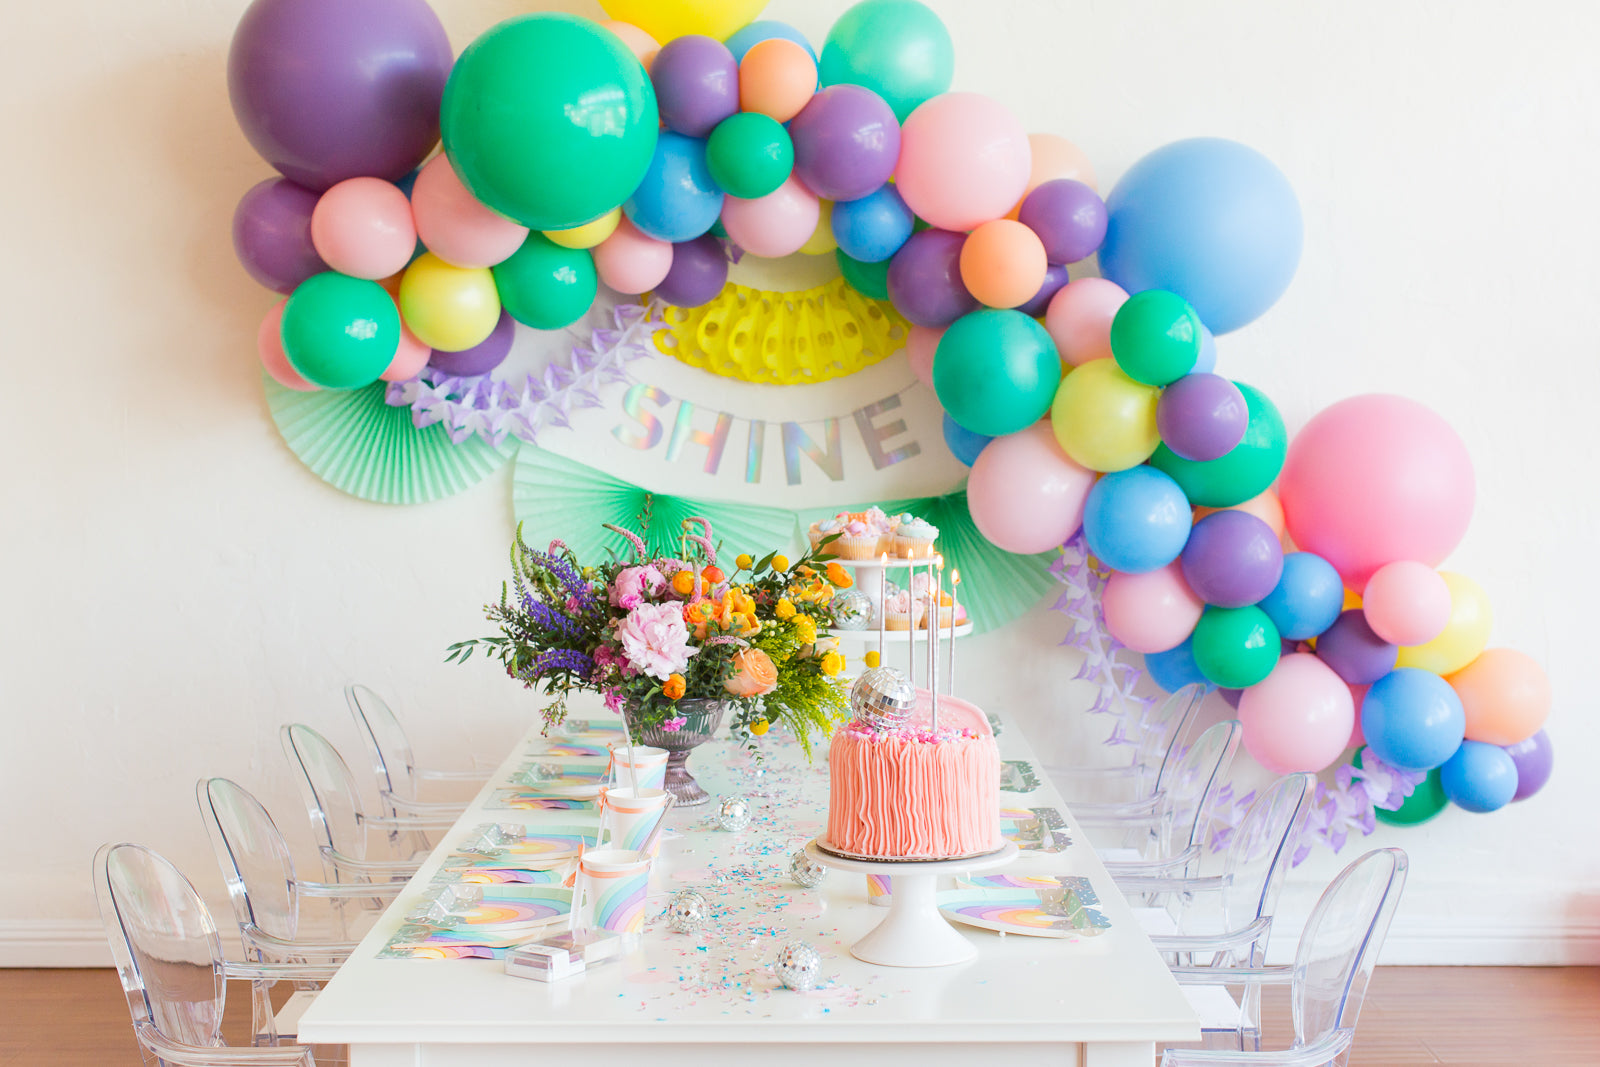 Rainbow party decorations set up for a girl's rainbow birthday party.